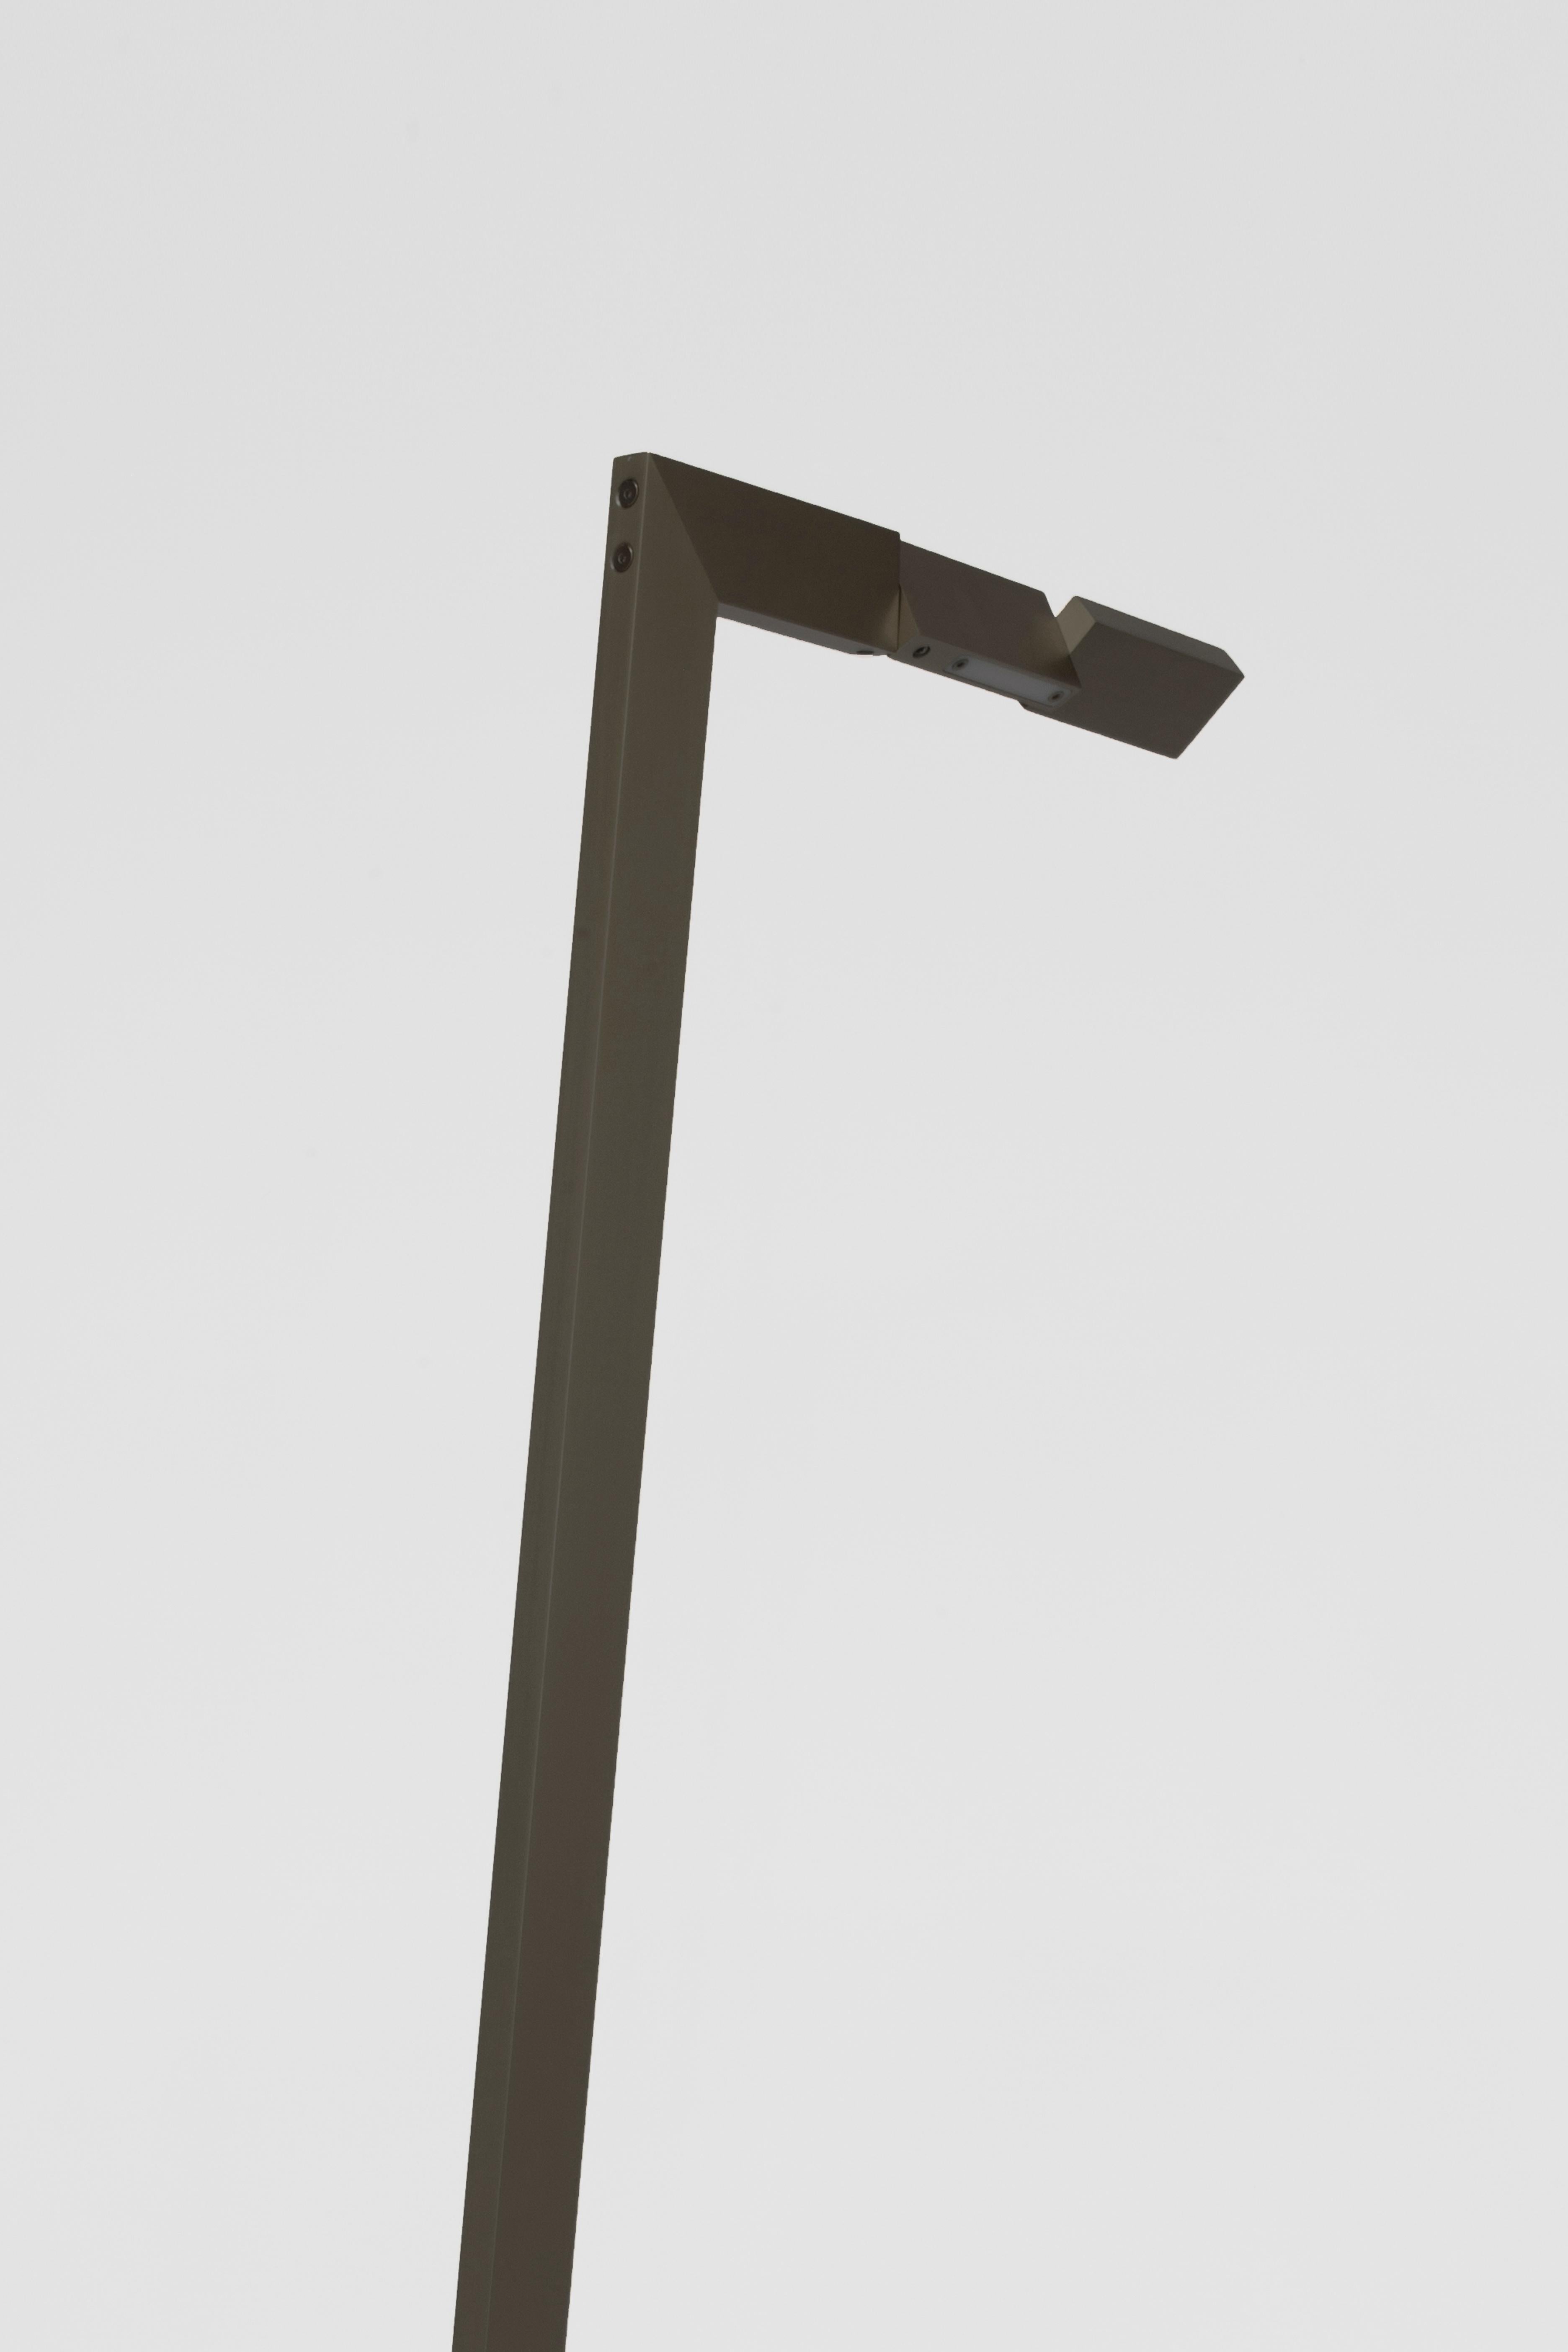 Minimalist Contemporary Lido Floor Lamp 001 in Blackened Brass by Orphan Work For Sale